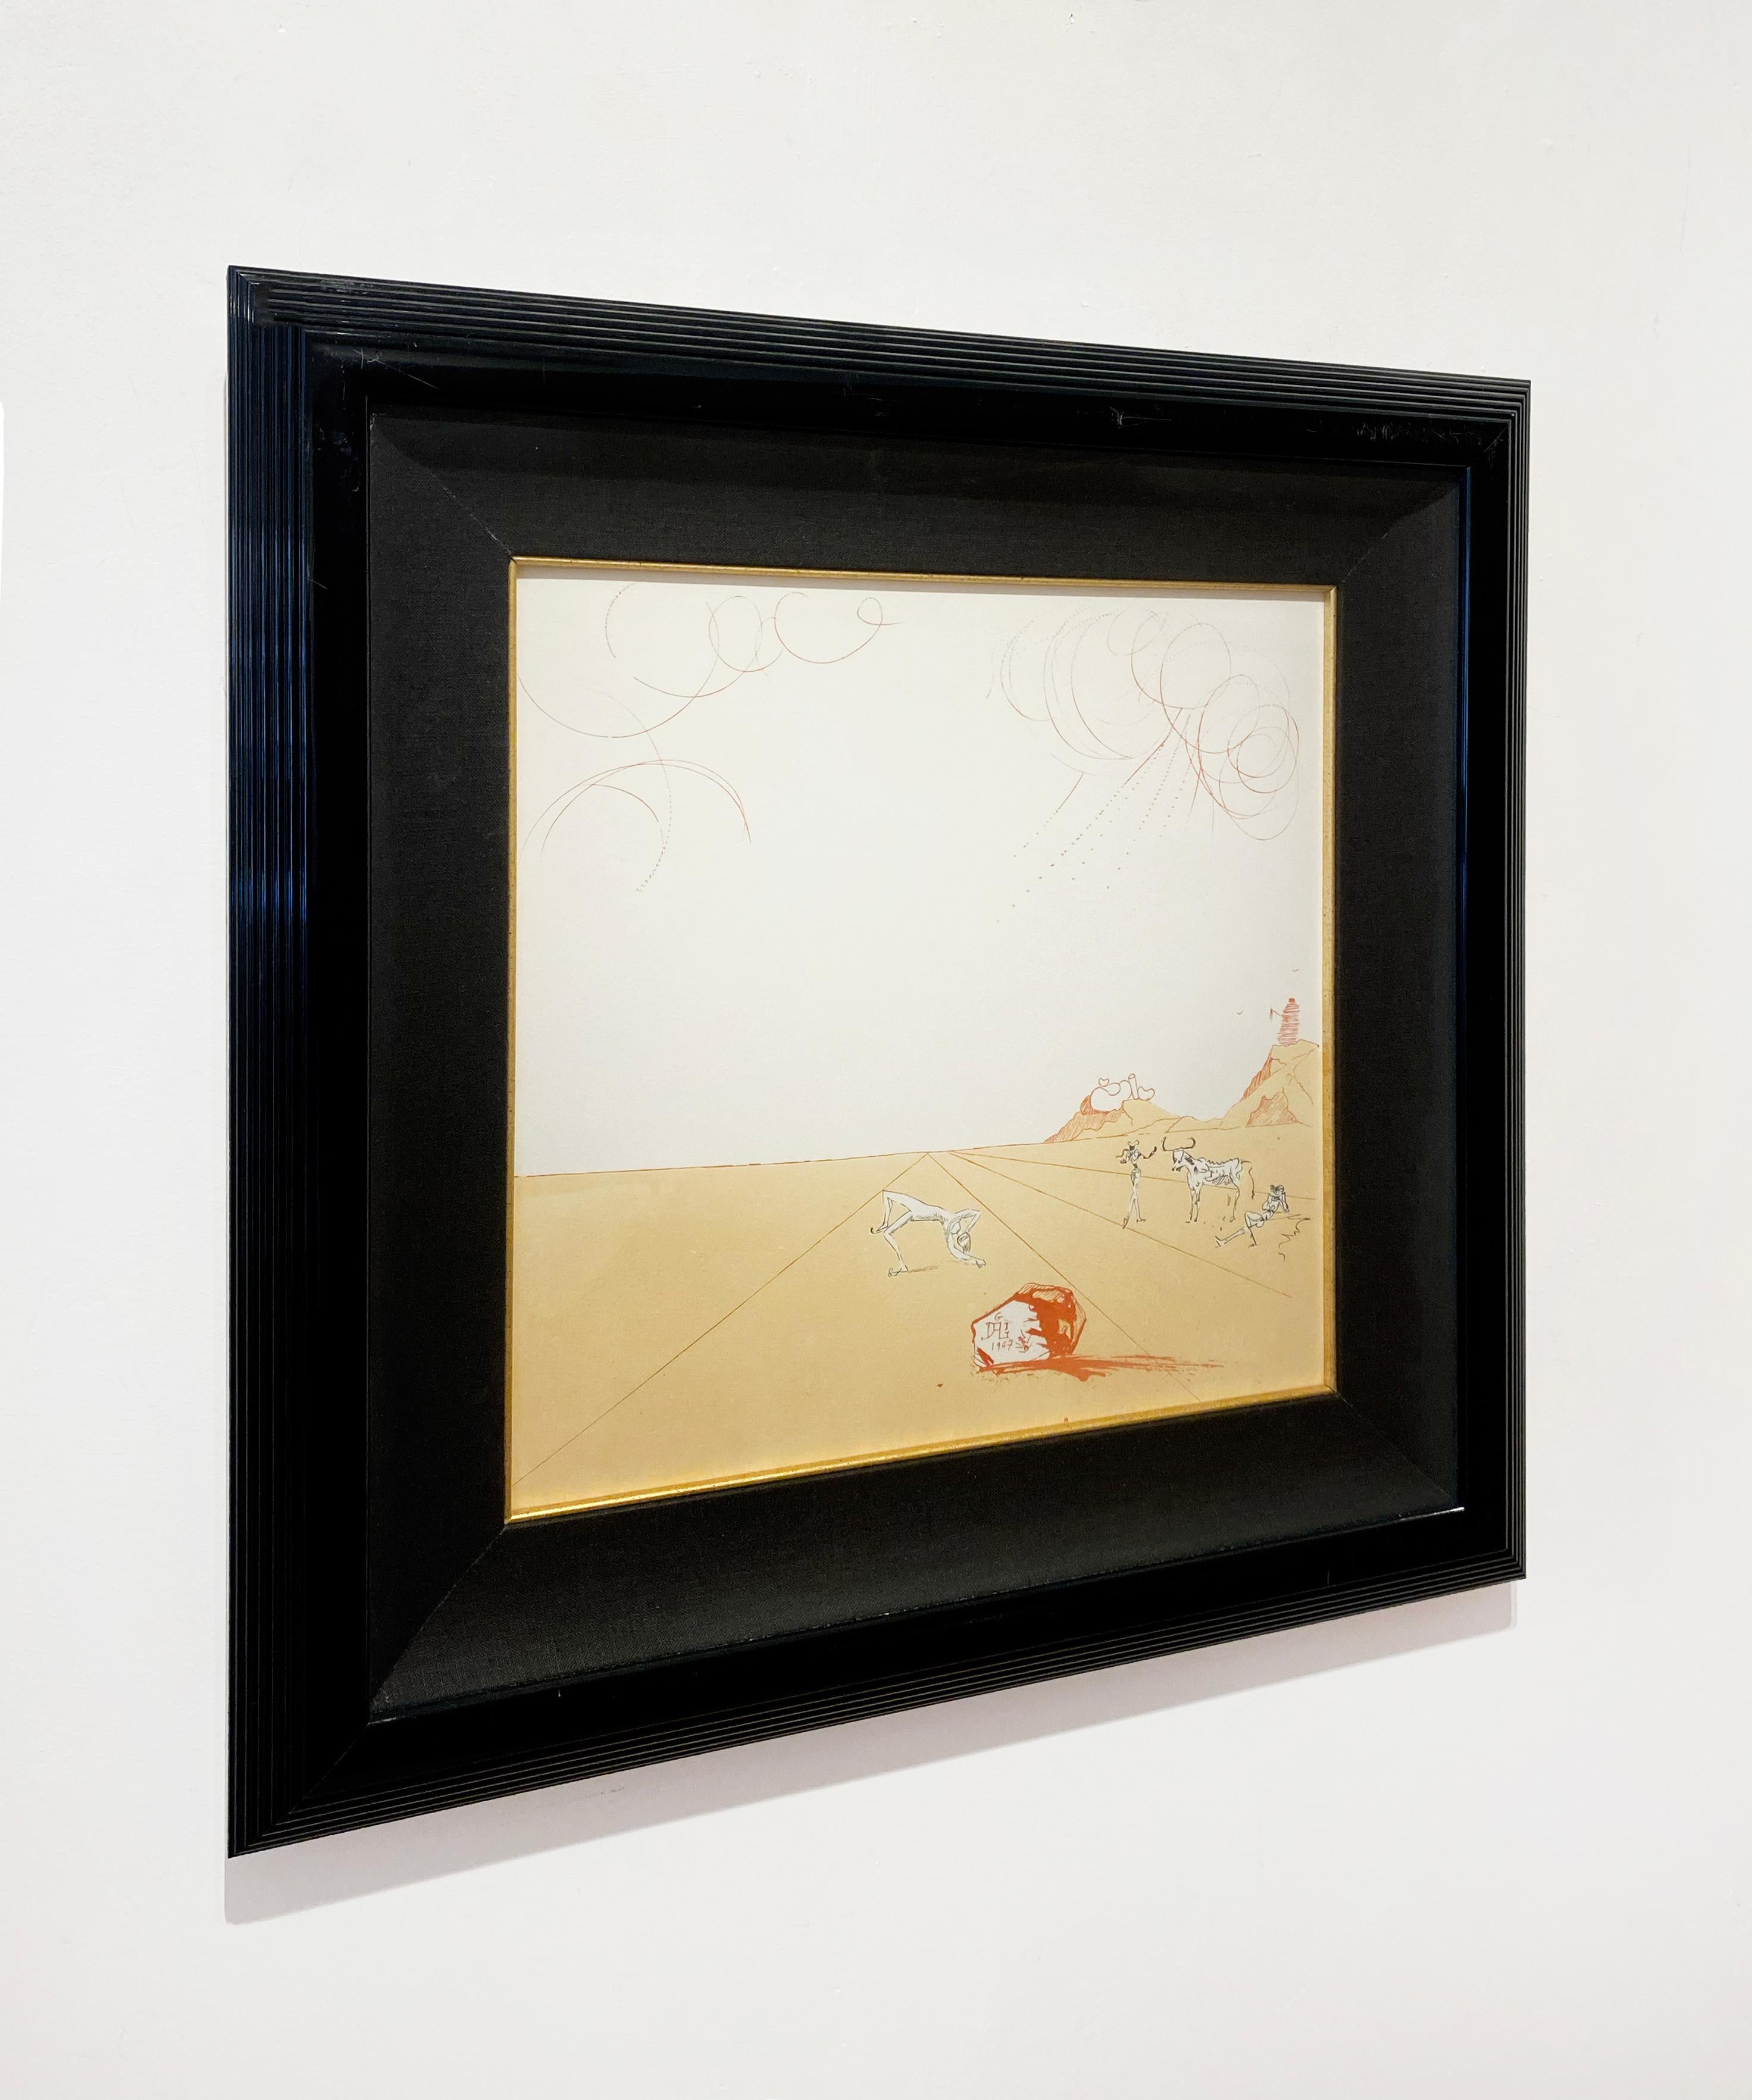 Artist:  Dali, Salvador
Title:  Paysage Iberique from Pasiflore
Series:  Neuf Paysages
Date:  1980
Medium:  Aquatint and photogravures with black drypoint remarques
Framed Dimensions:  22.5